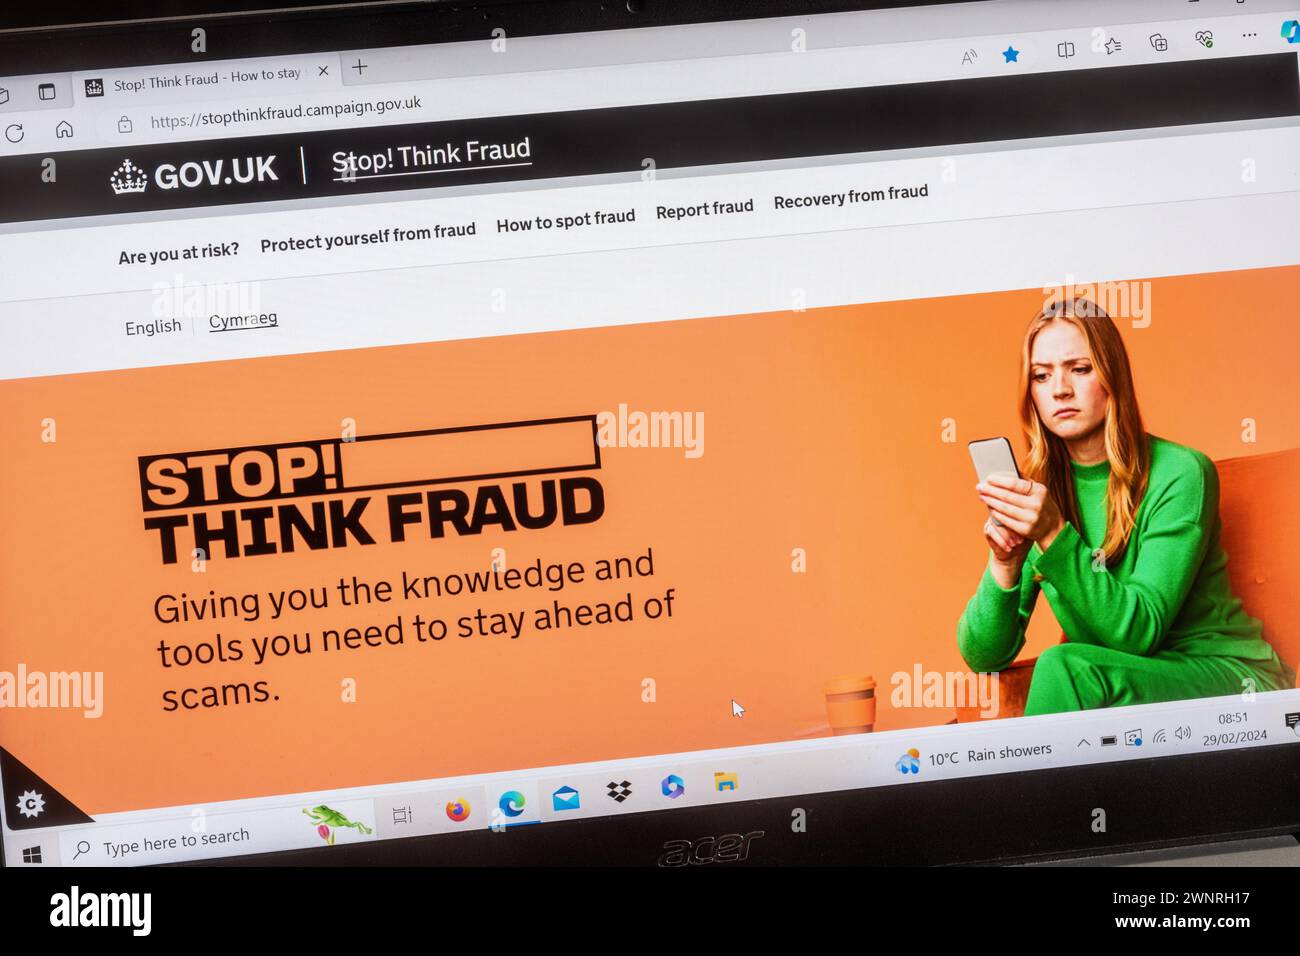 Stop Think Fraud web page, government information or advice on Gov.uk website about how to spot fraudsters and protect yourself Stock Photo